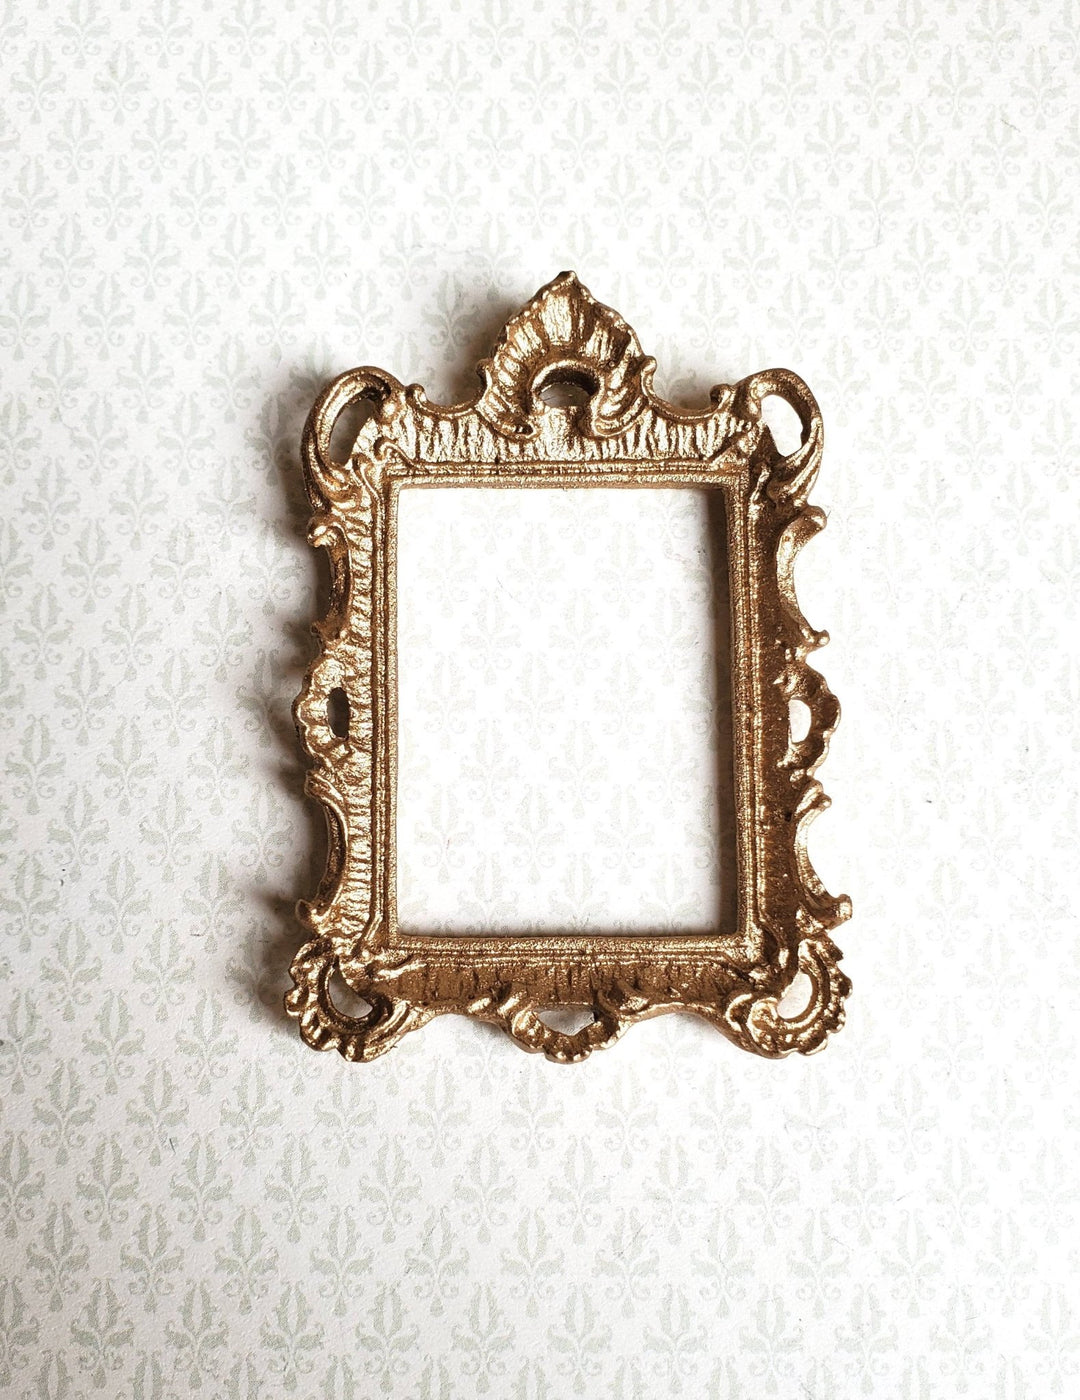 Dollhouse Miniature Picture Fancy Gold for Painting 1:12 Scale Accessory A4521 - Miniature Crush